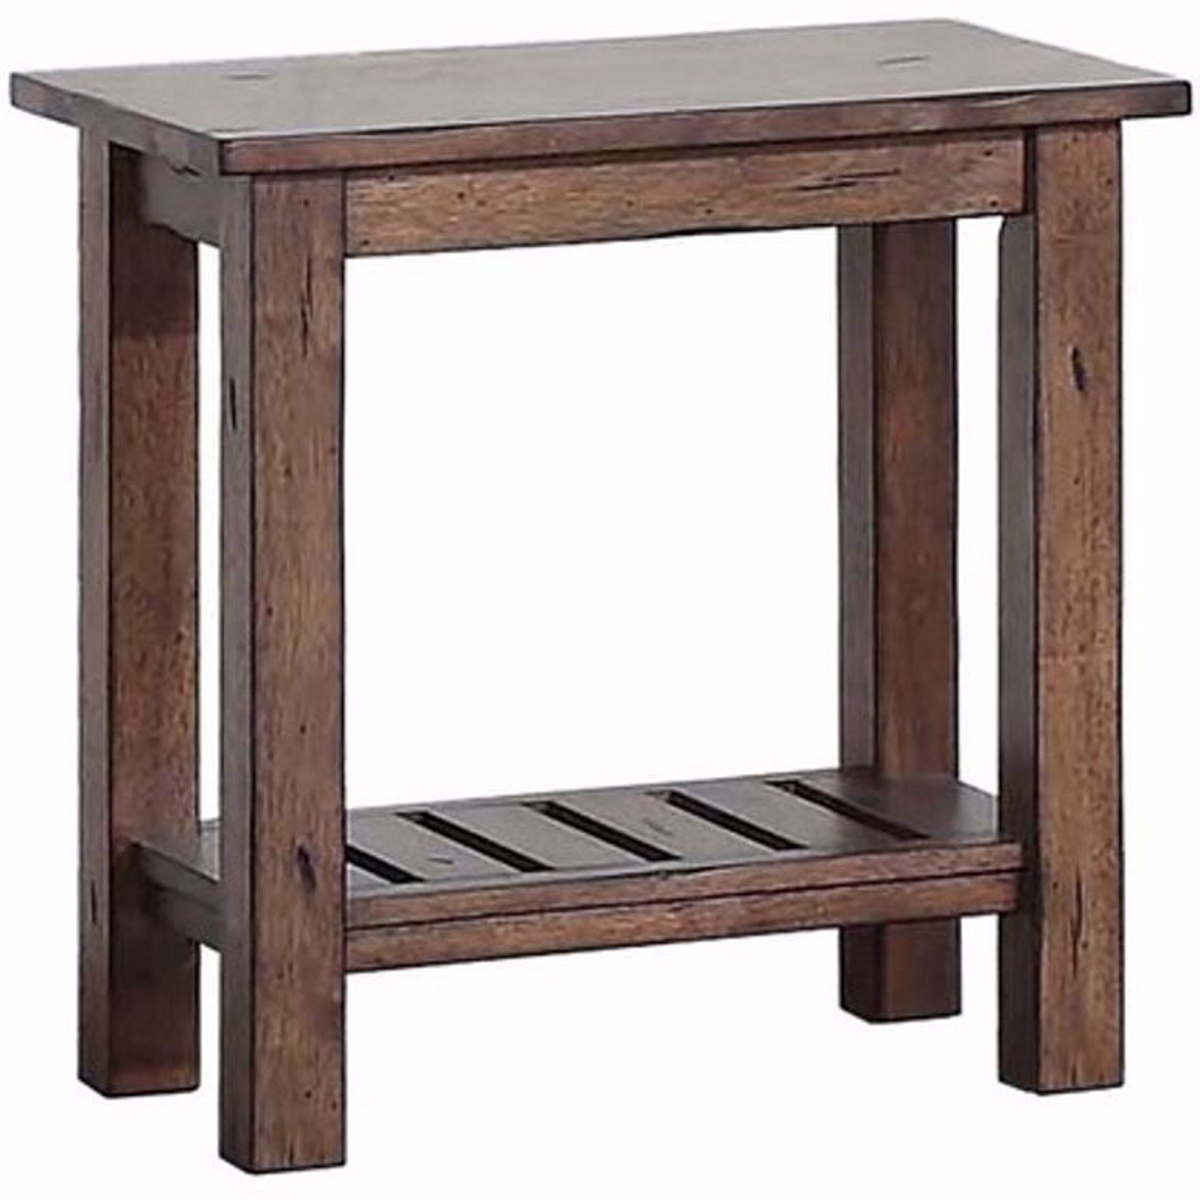 Picture of Carmel Chairside Table